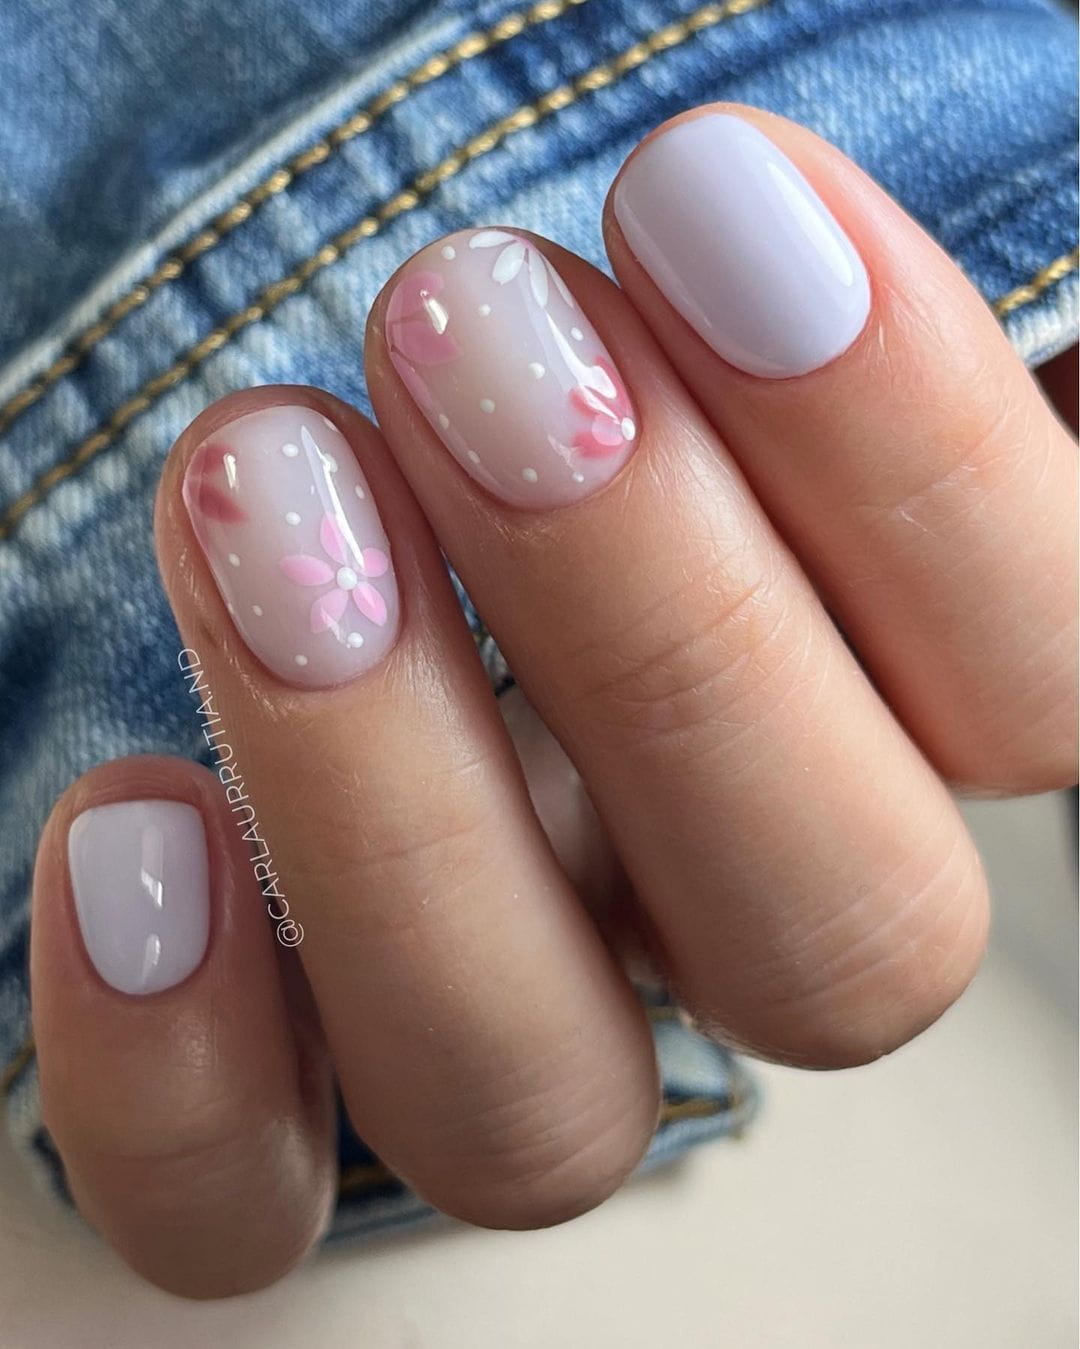 100 Of The Best Spring Inspired Nail Designs images 25